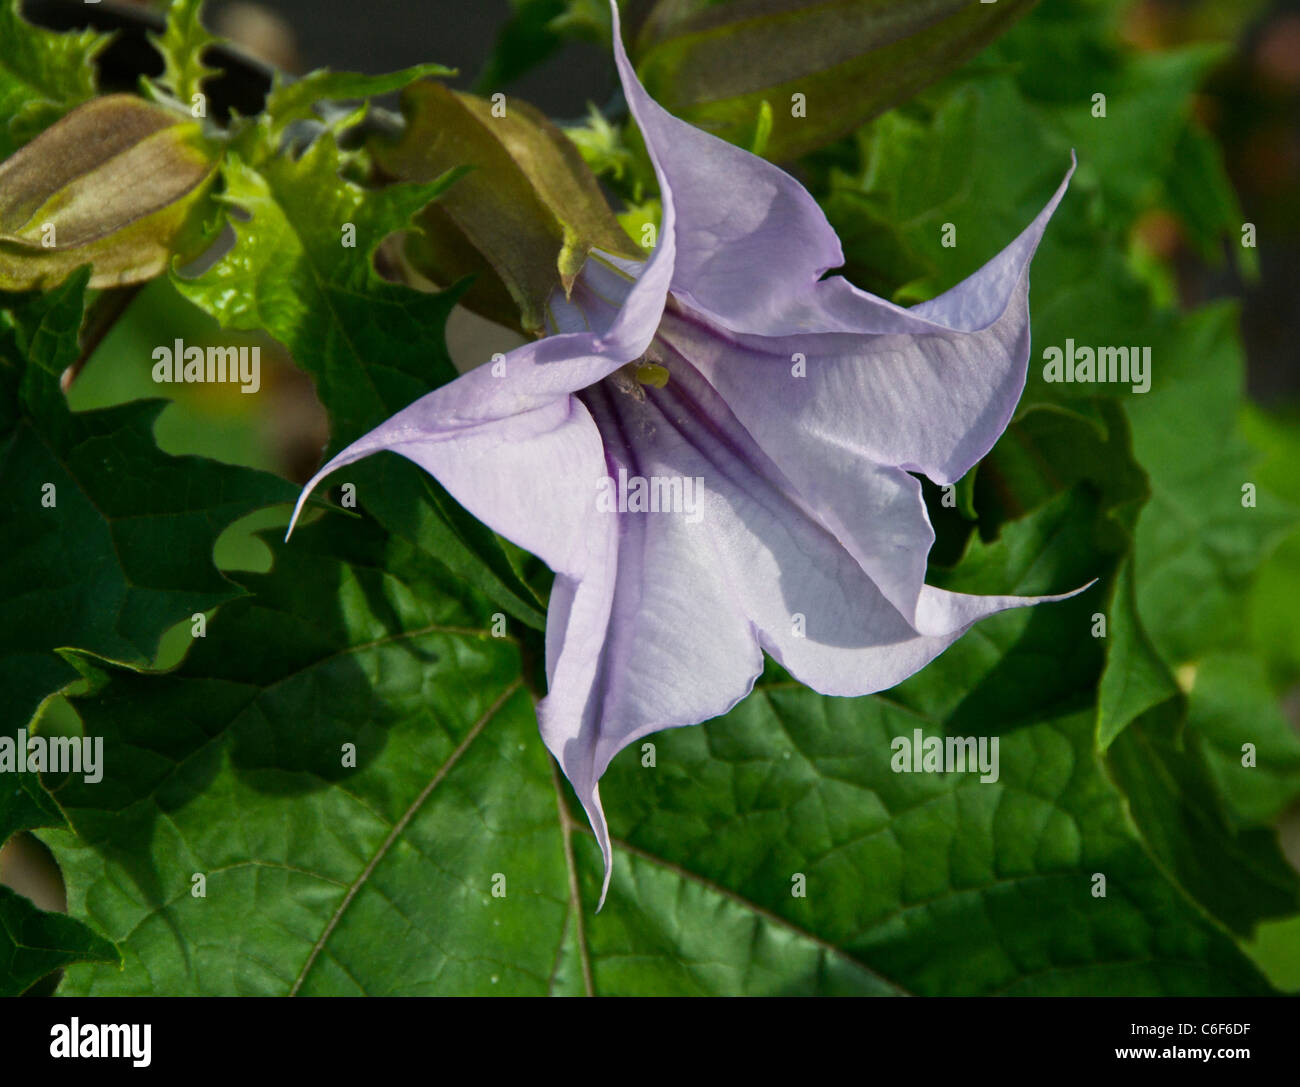 Thornapple thorn apple thorn-apple poisonous plant.Jimson weed is a poisonous plant with hallucinogenic properties . Stock Photo